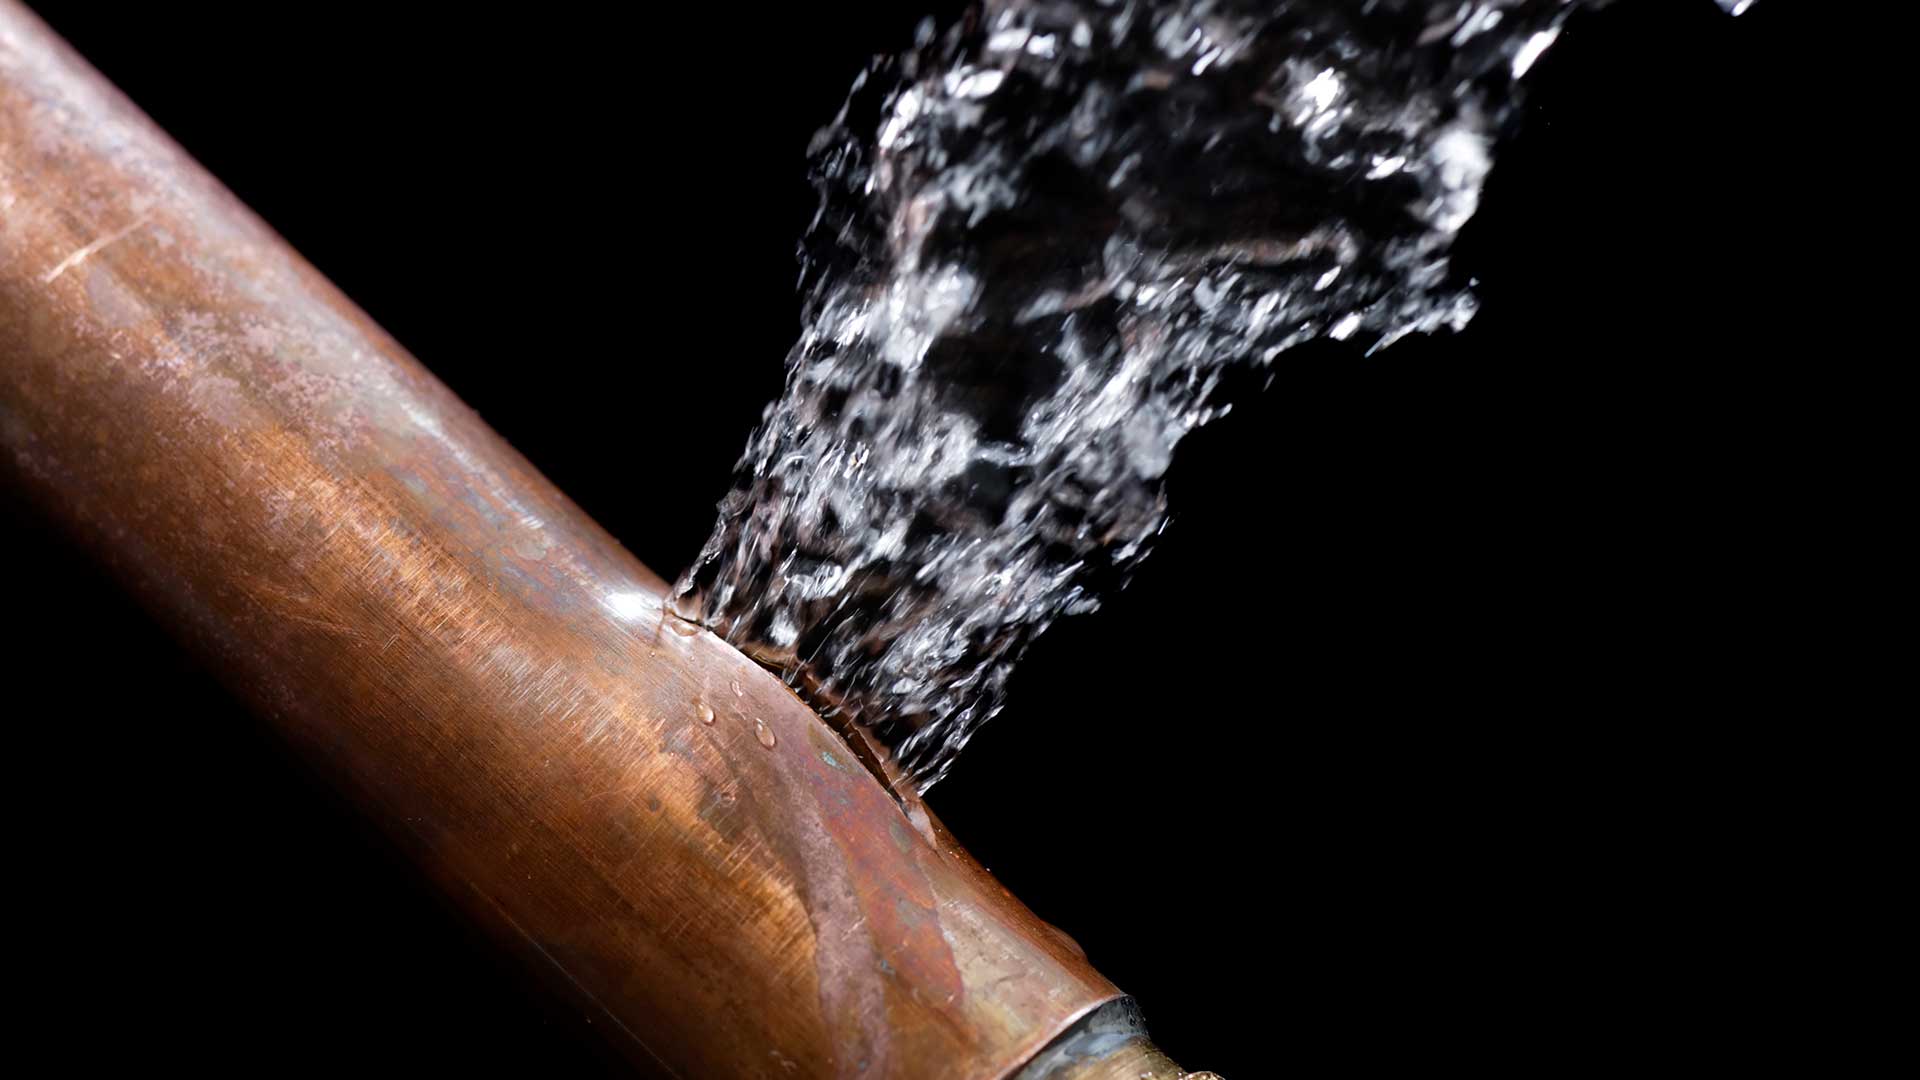 How to Detect a Water Leak Without Destroying Your Home